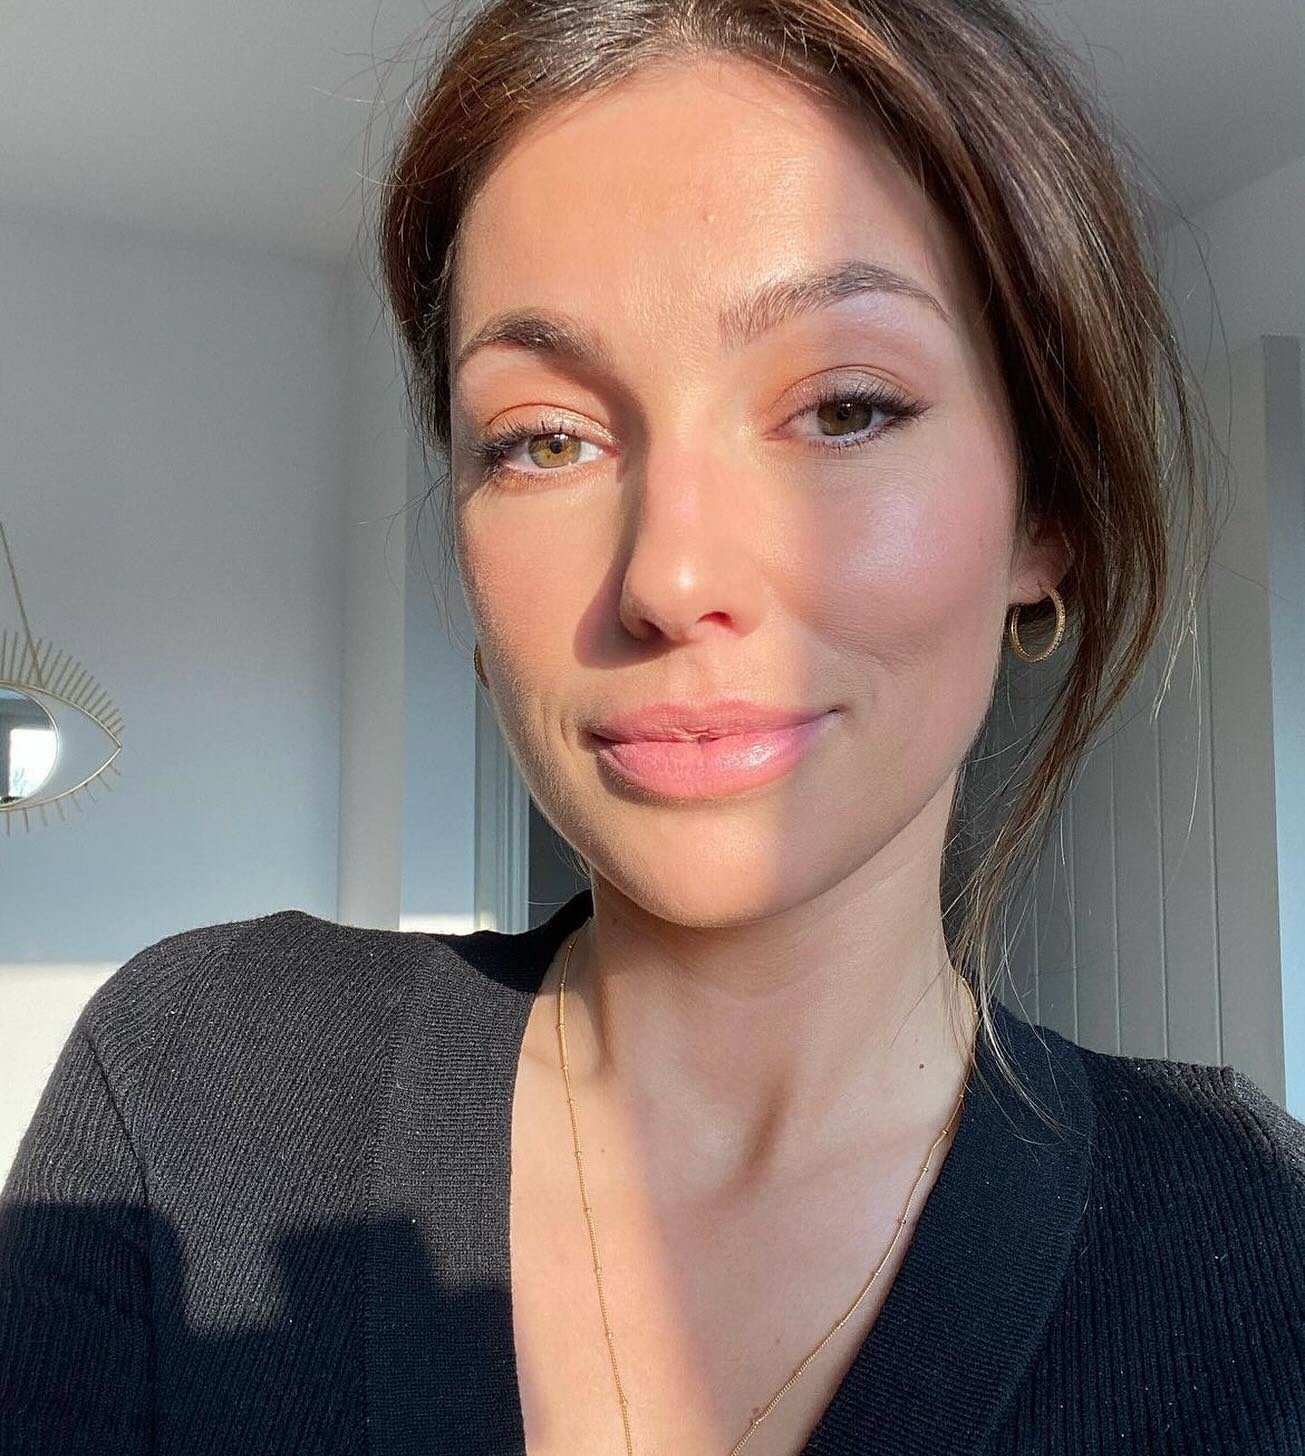 A natural glow for this #lucieexpert herself. Harriet specialises in sophisticated glam for the elegant bride and can be booked for your next event via the @lucie.app.

| THE COTSWOLDS |

#LucieAtHome #LucieMakeup